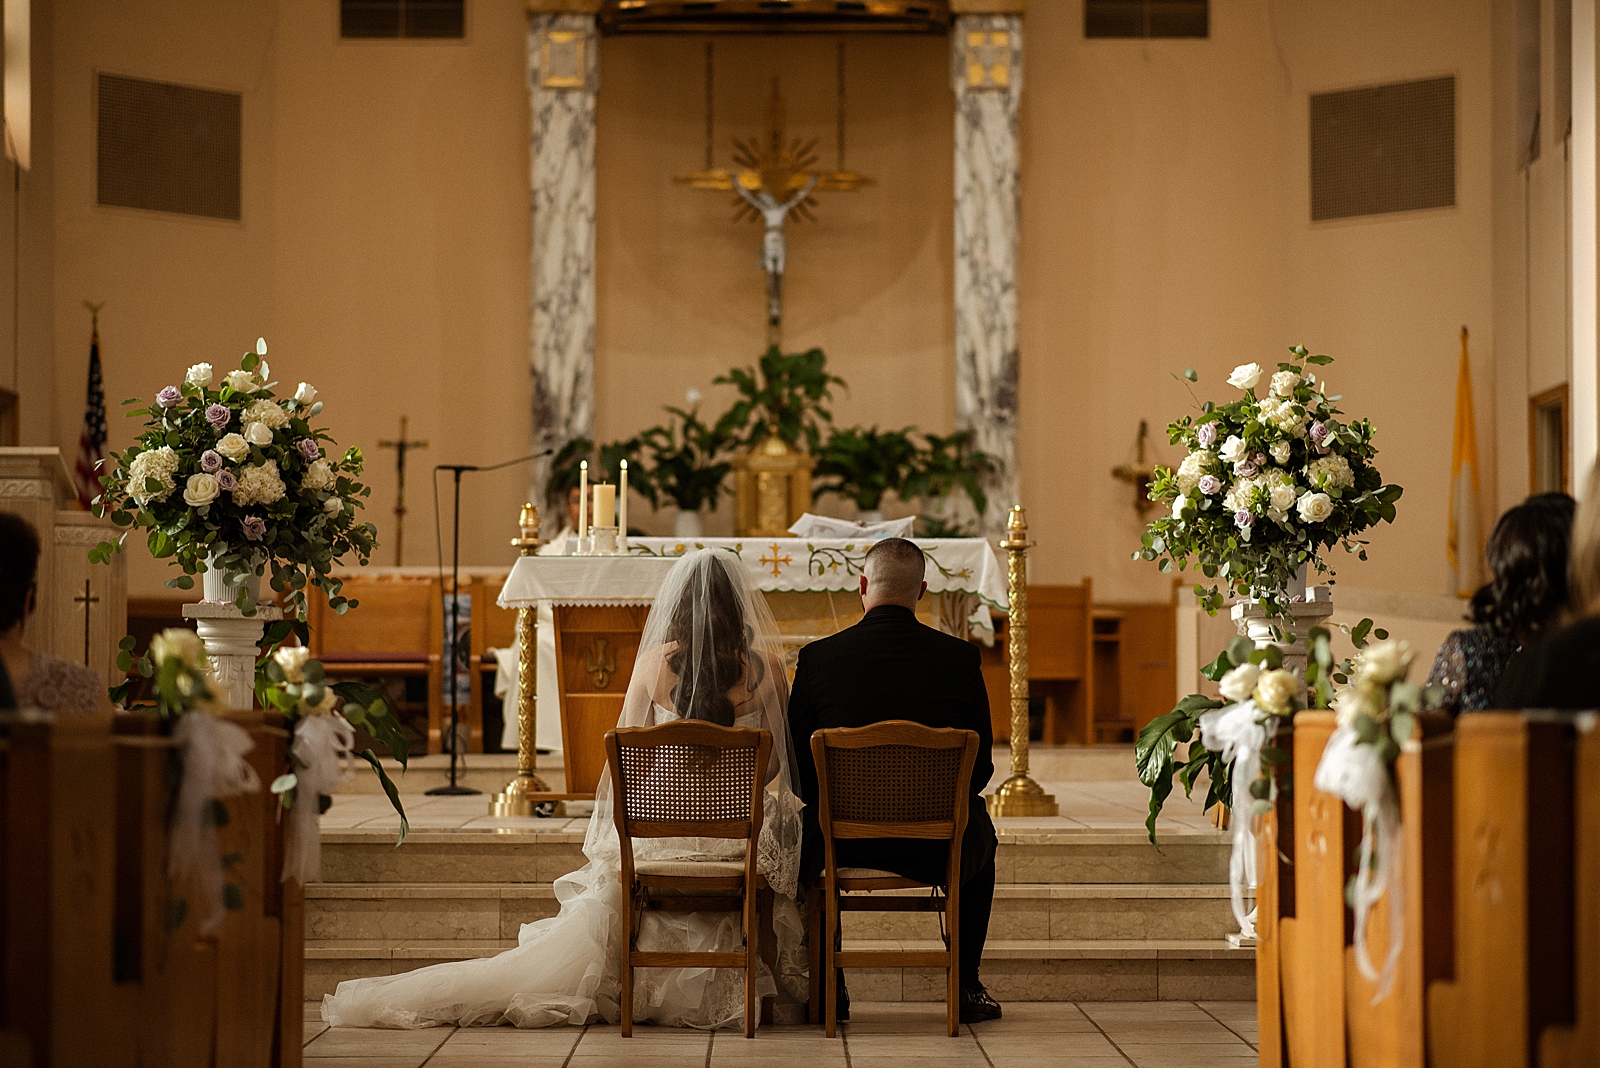 Bride and Groom sitting in front of alter for Ceremony